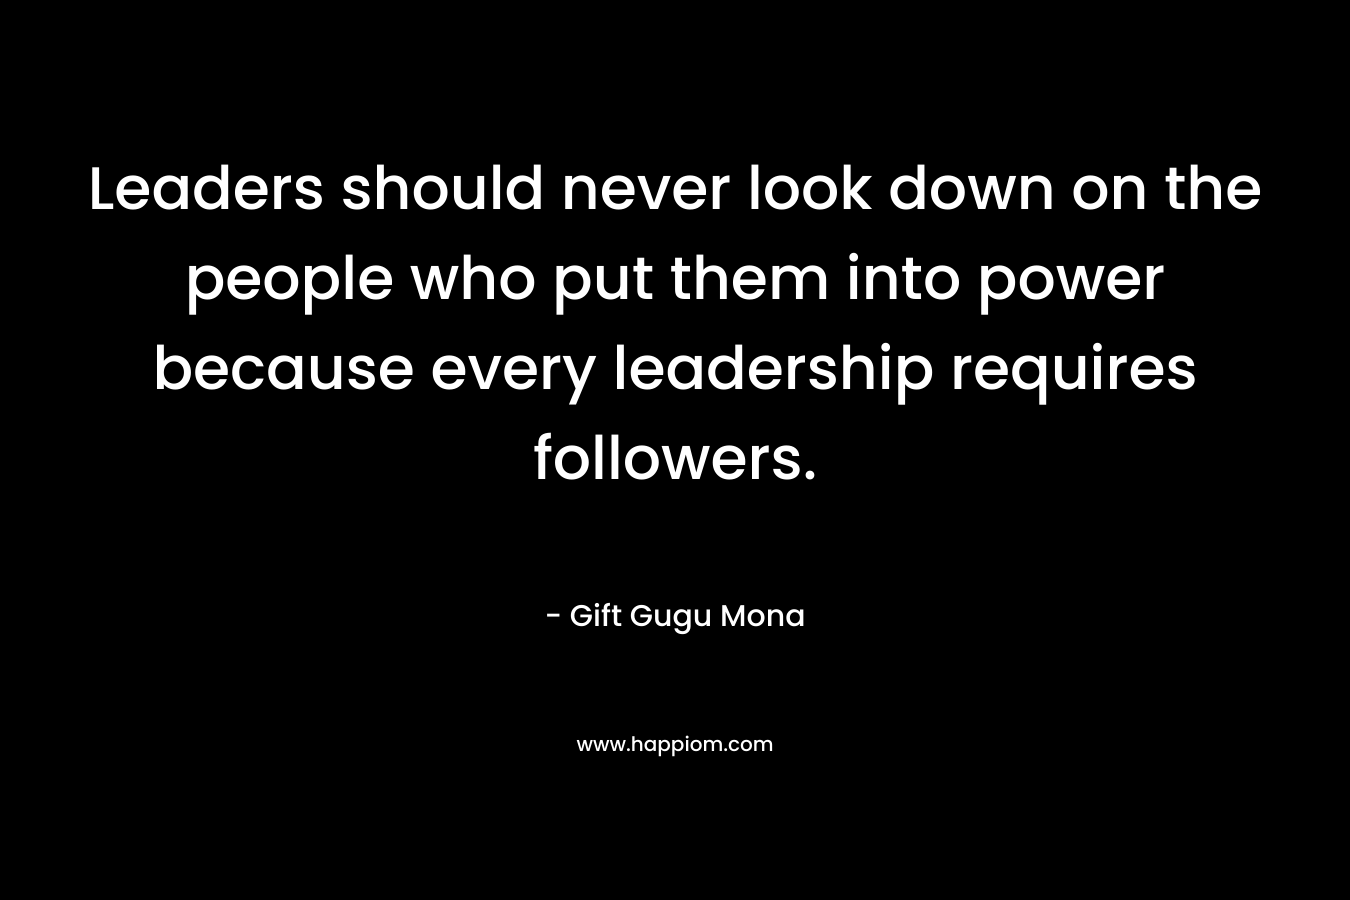 Leaders should never look down on the people who put them into power because every leadership requires followers.